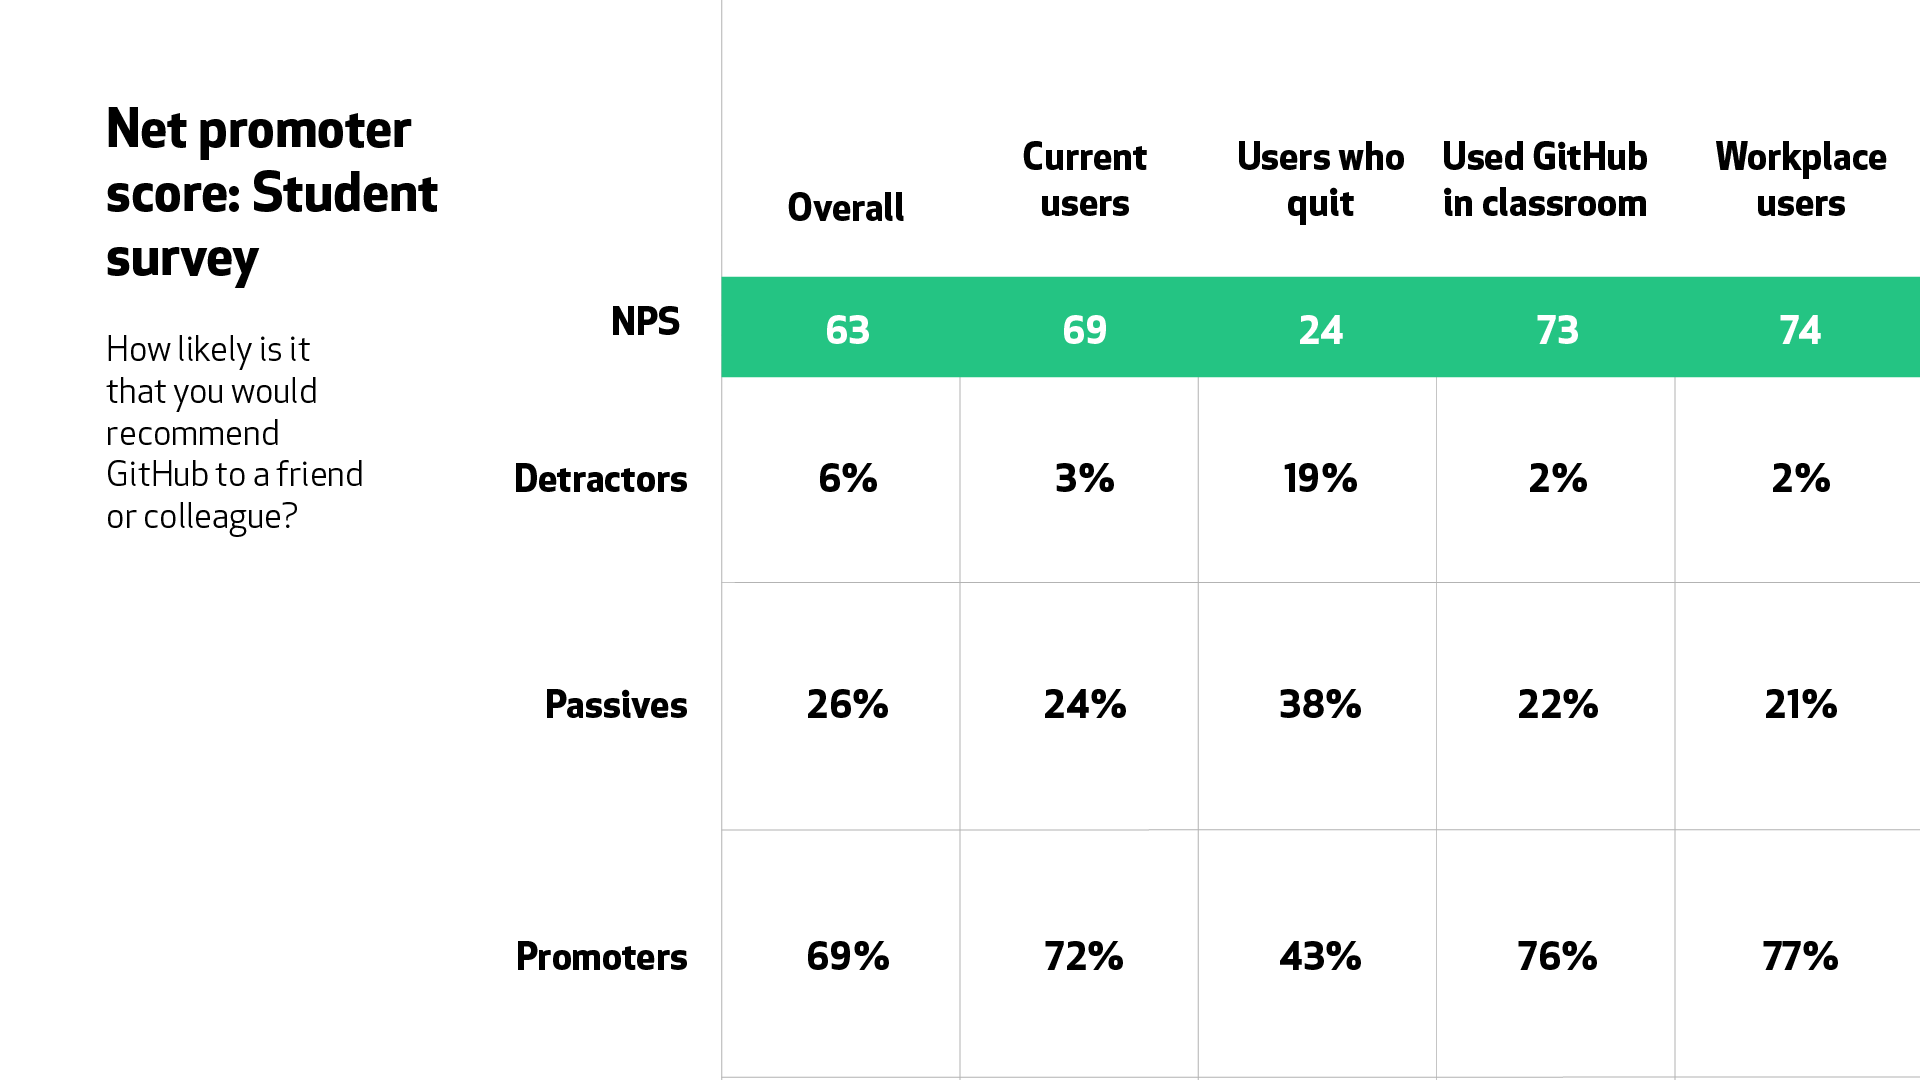 A table for student net promoter score based on the question “How likely is it that you would recommend GitHub to a friend or colleague?” Overall score of 63, with a low of 24 for users who quit and a high of 74 for users who use GitHub in the workplace.